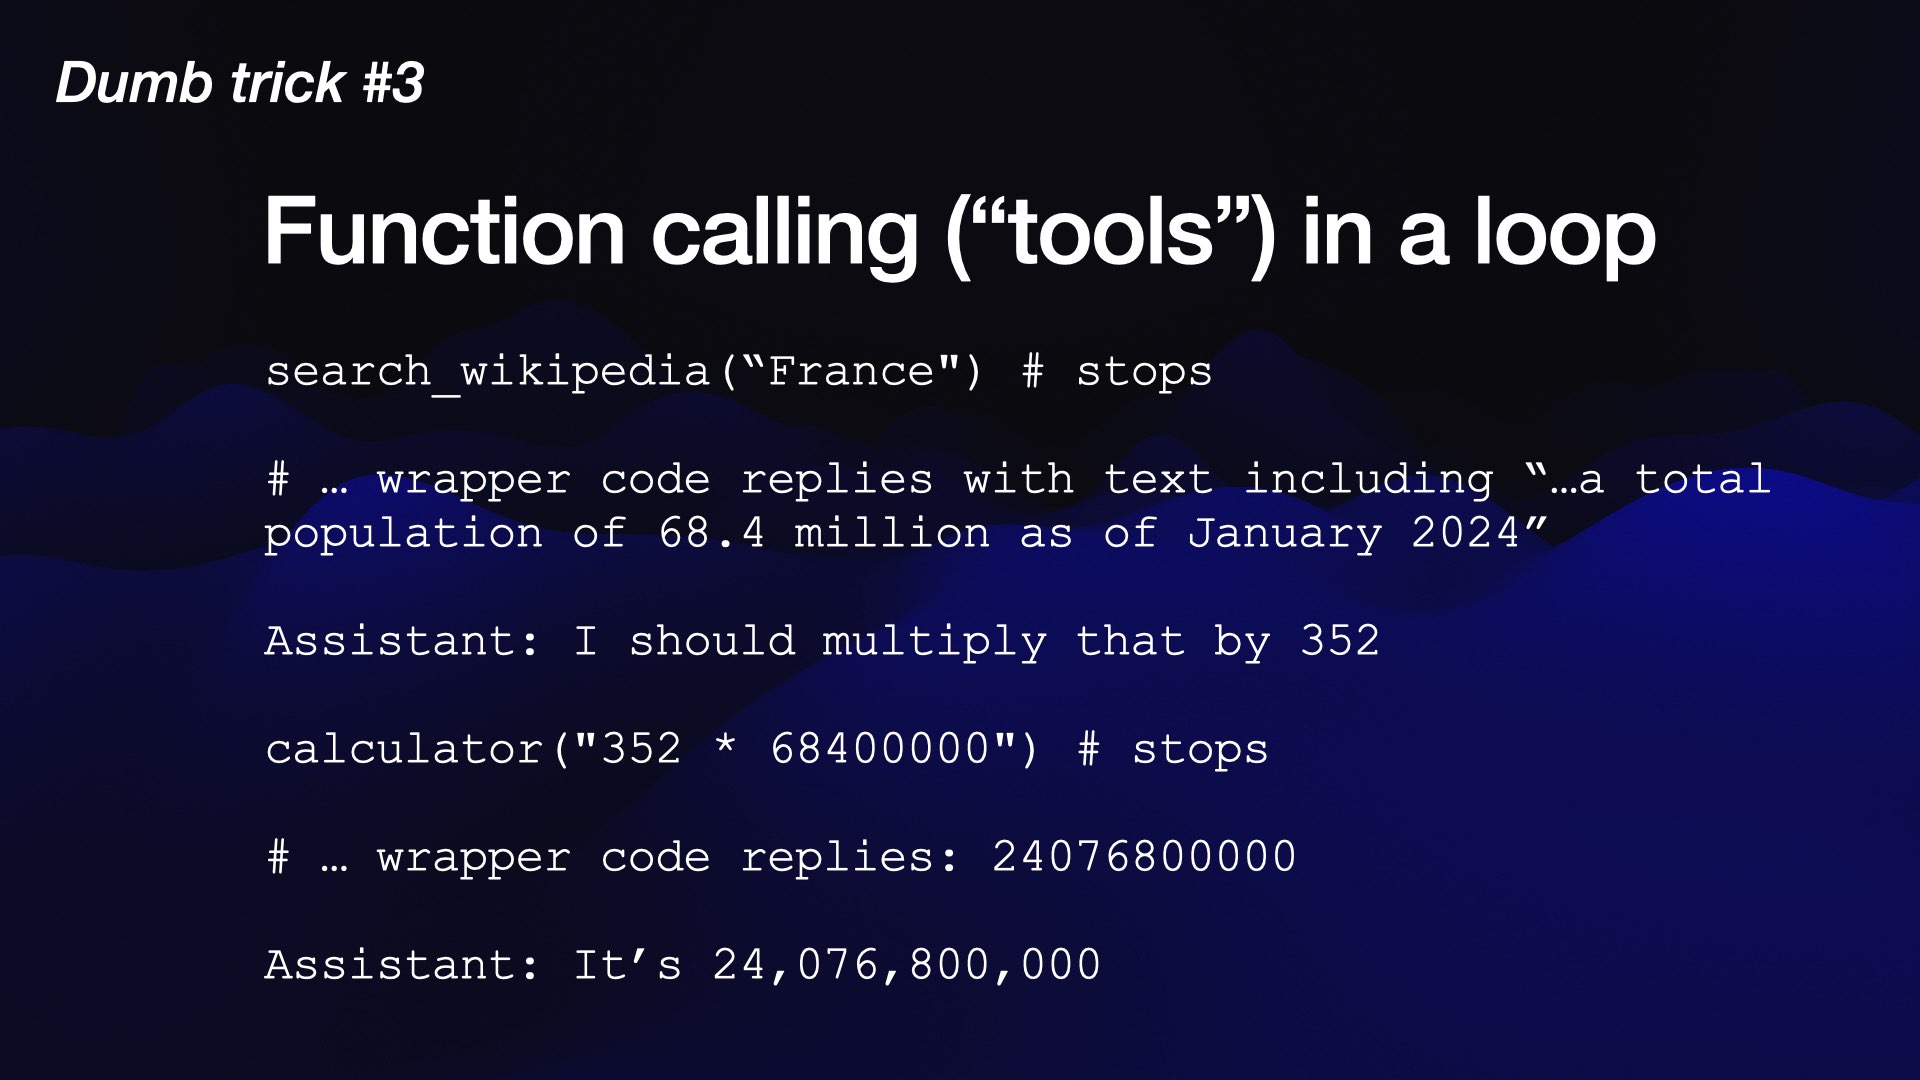 search_wikipedia(“France") # stops  # … wrapper code replies with text including “…a total population of 68.4 million as of January 2024”  Assistant: I should multiply that by 352  calculator("352 * 68400000") # stops  # … wrapper code replies: 24076800000  Assistant: It’s 24,076,800,000t d